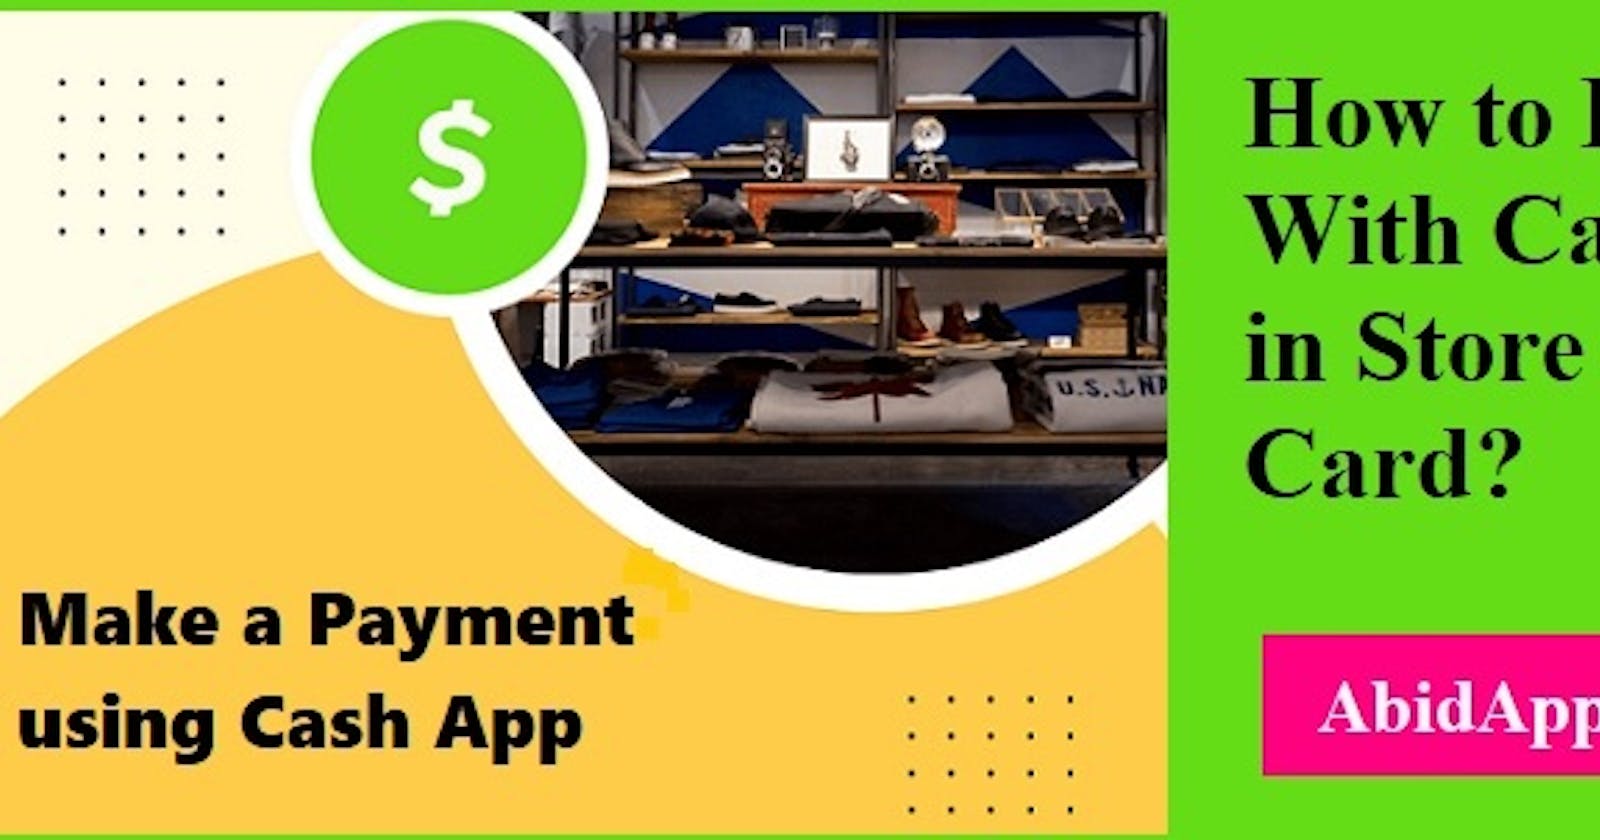 How do I pay with Cash App at store?